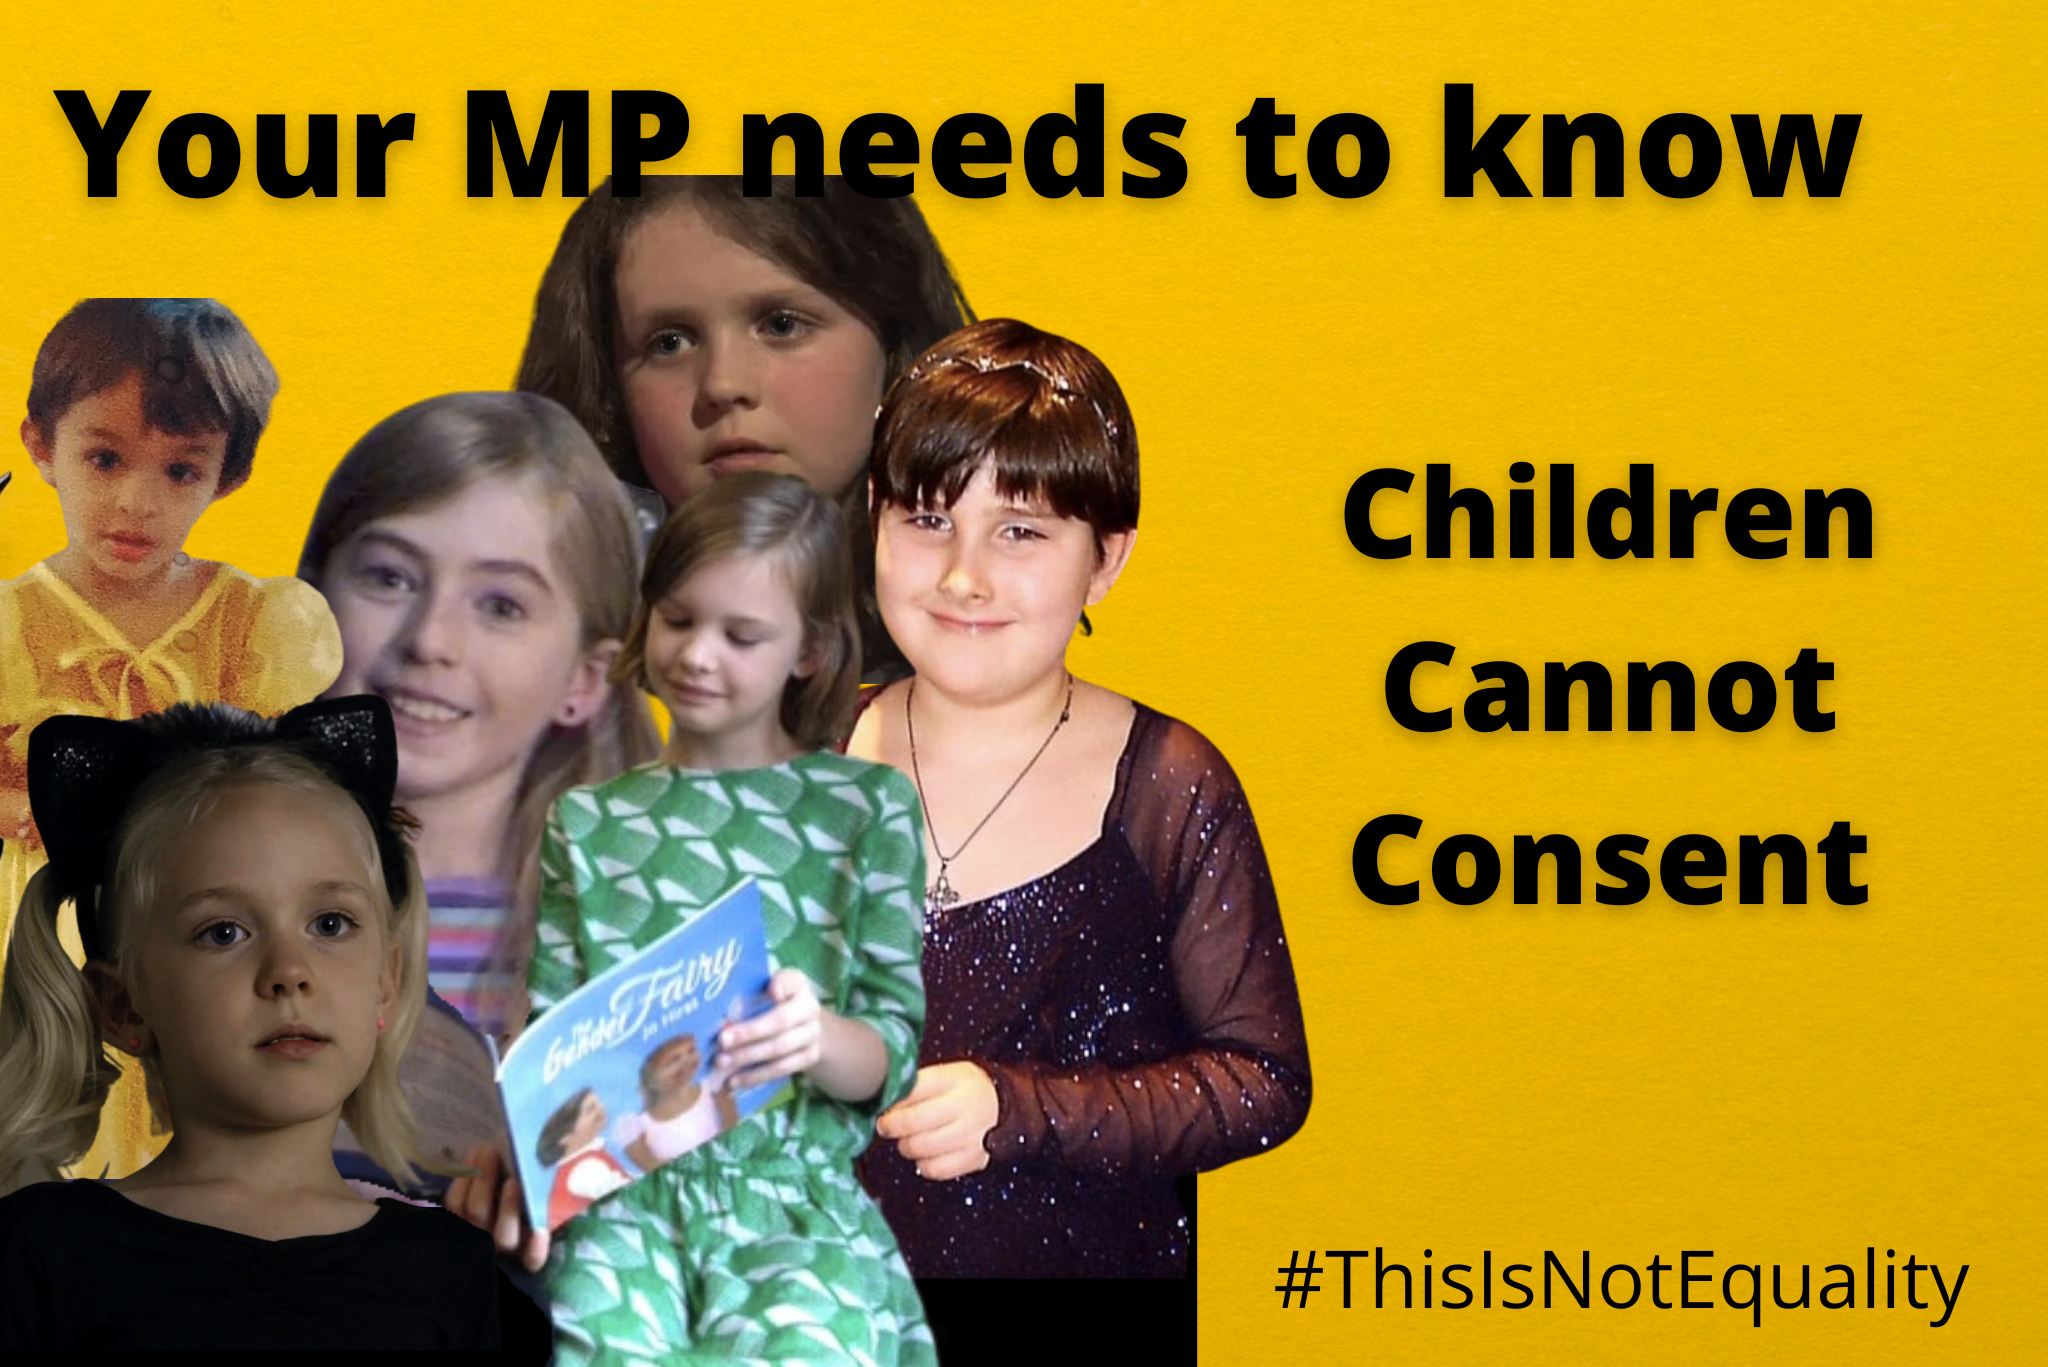 Tell your MP: Children Cannot Consent